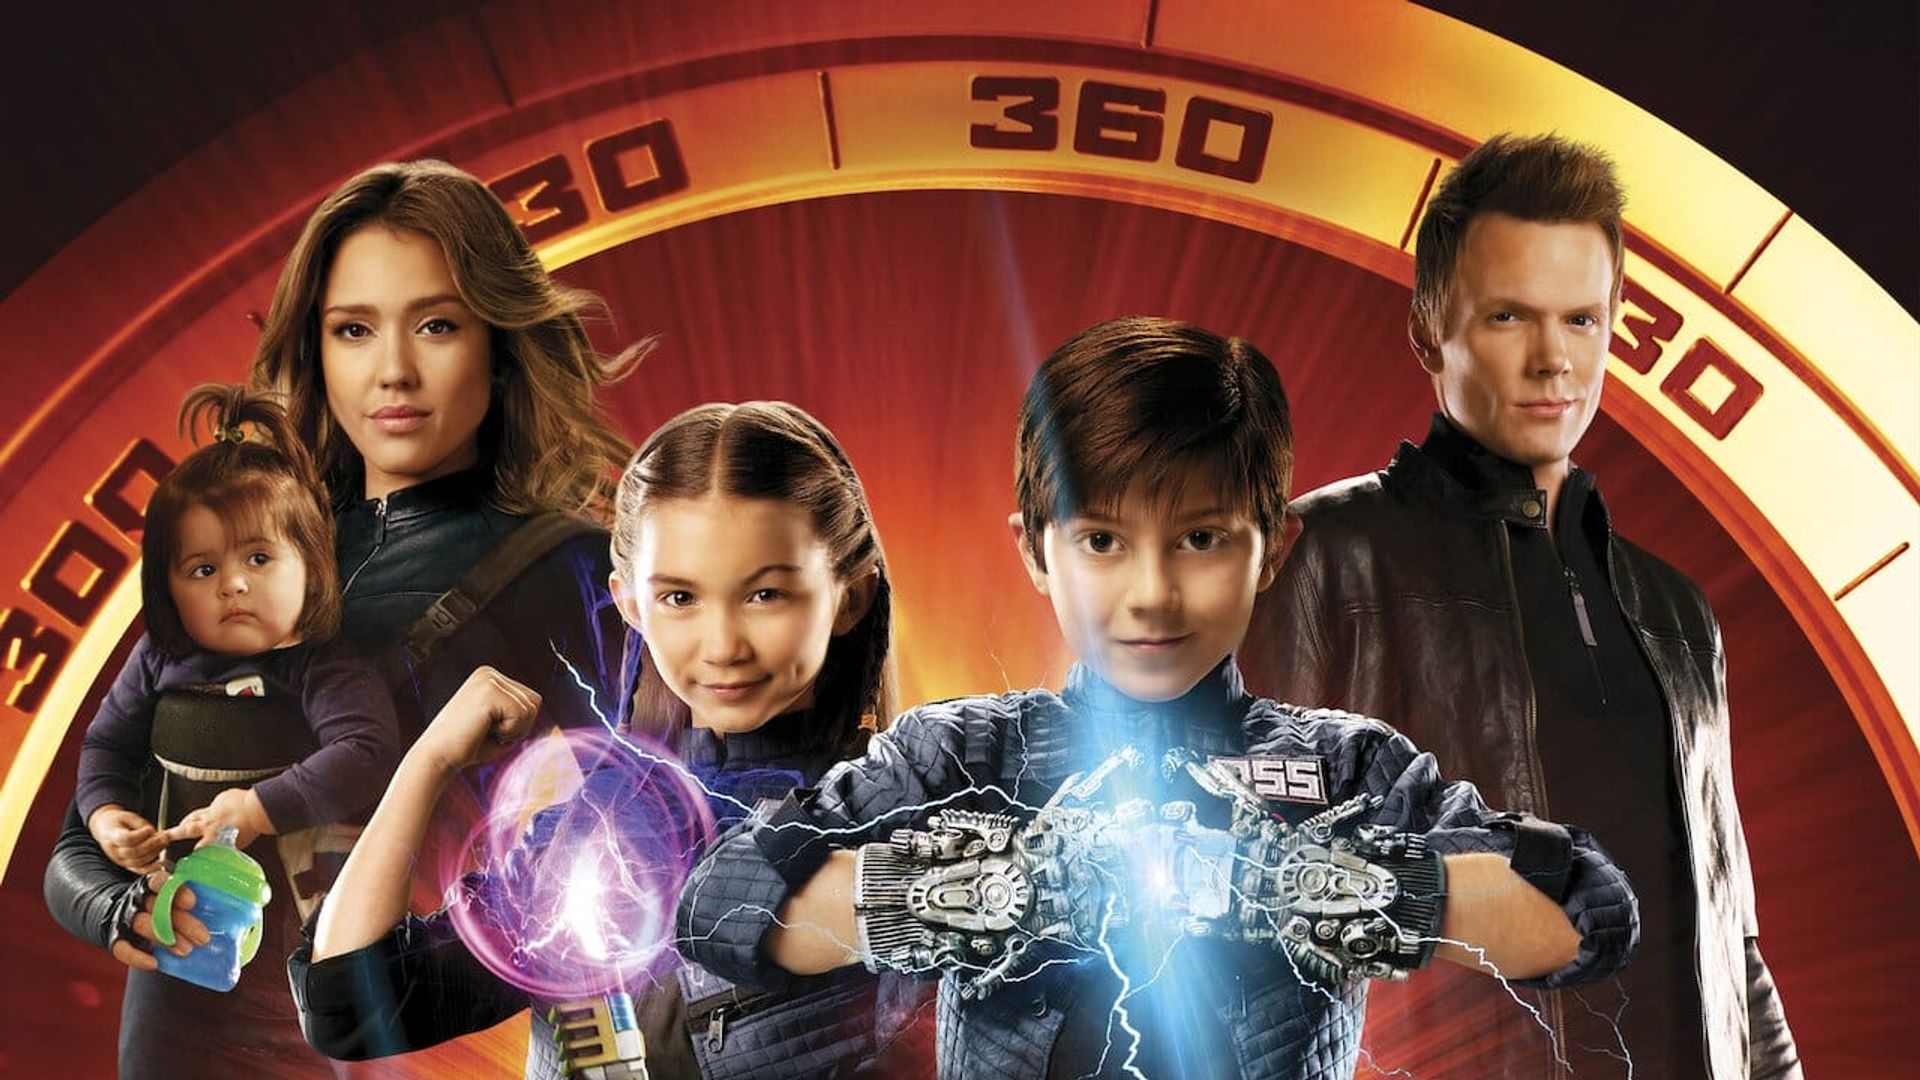 Spy Kids 4: All the Time in the World background